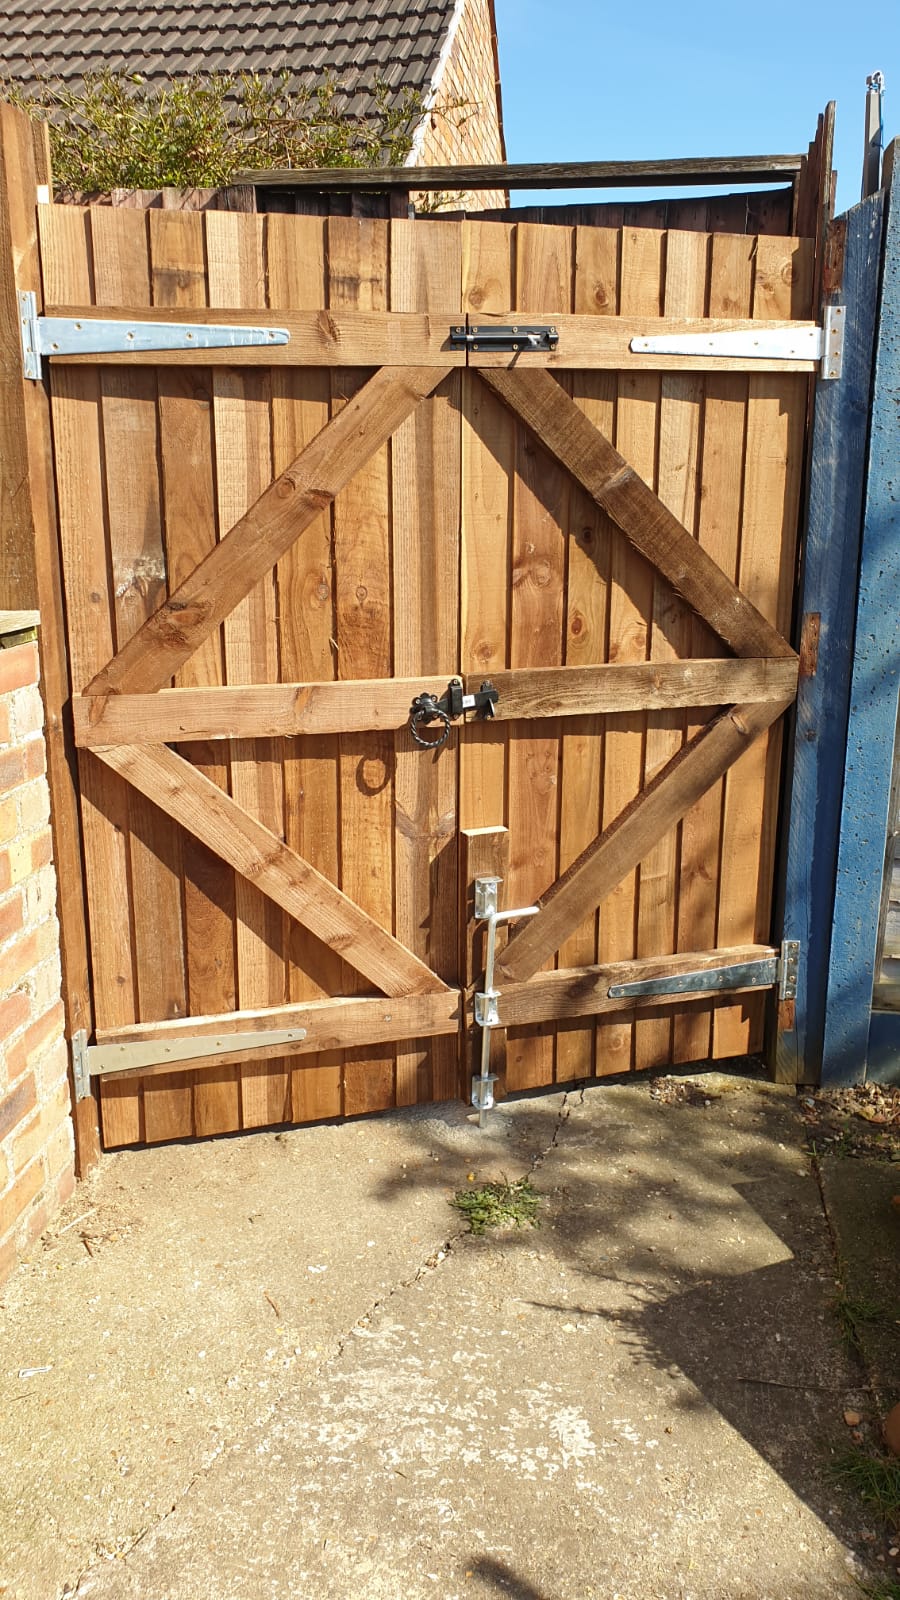 A 7 ft bespoke made double secure gate with all locks and fittings, suitable to park vehicle behind.